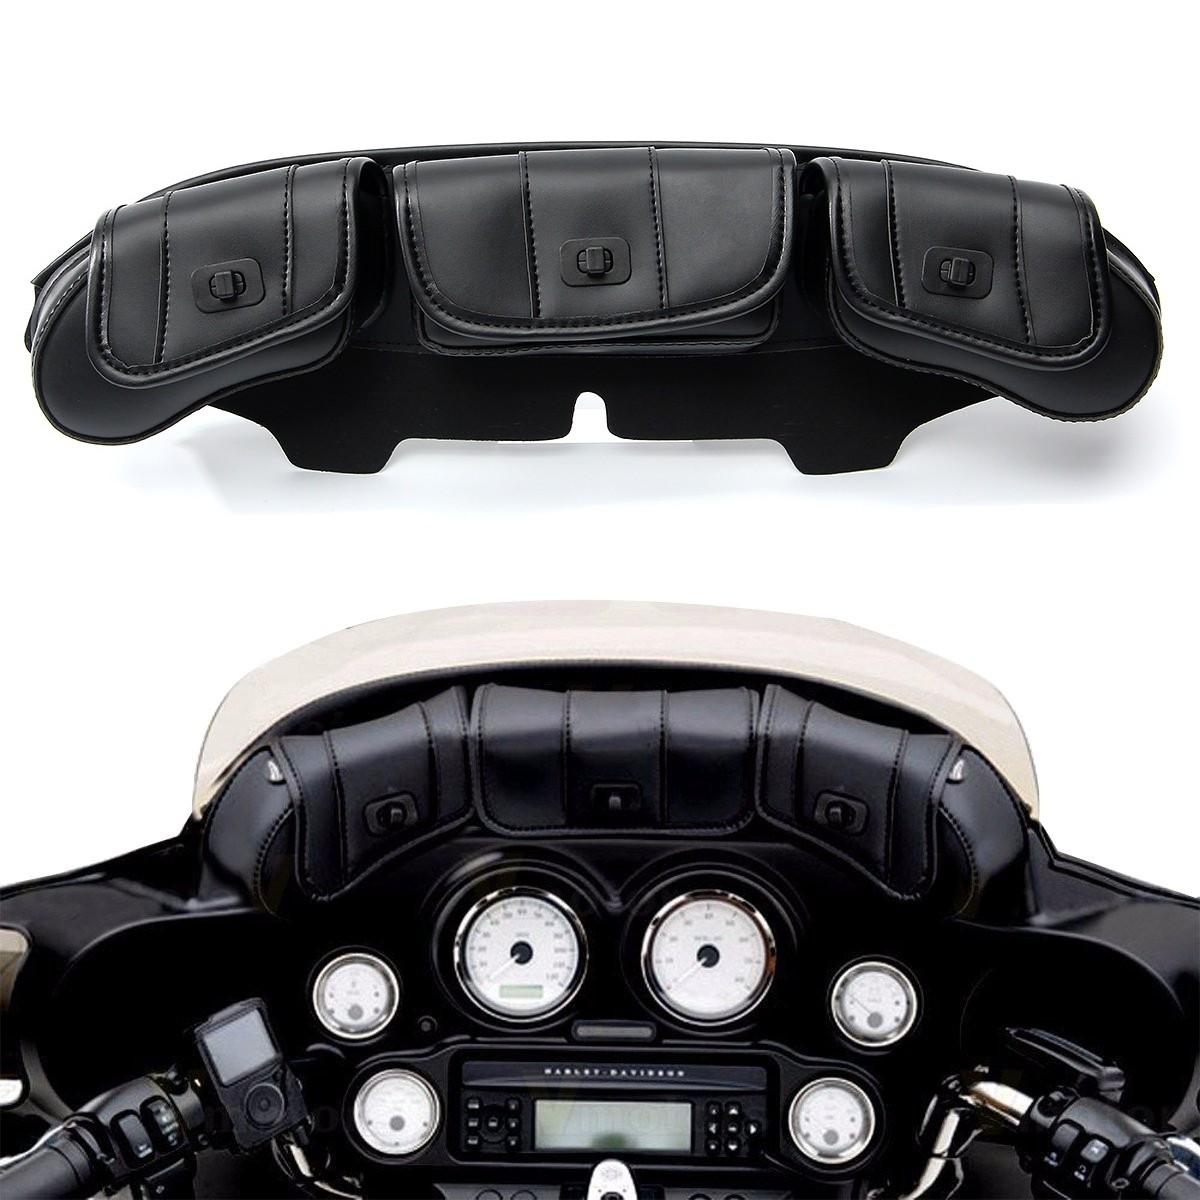 3 Pouch Pocket Fairing Wind Shield Bag For Harley Electra Street Glide Touring